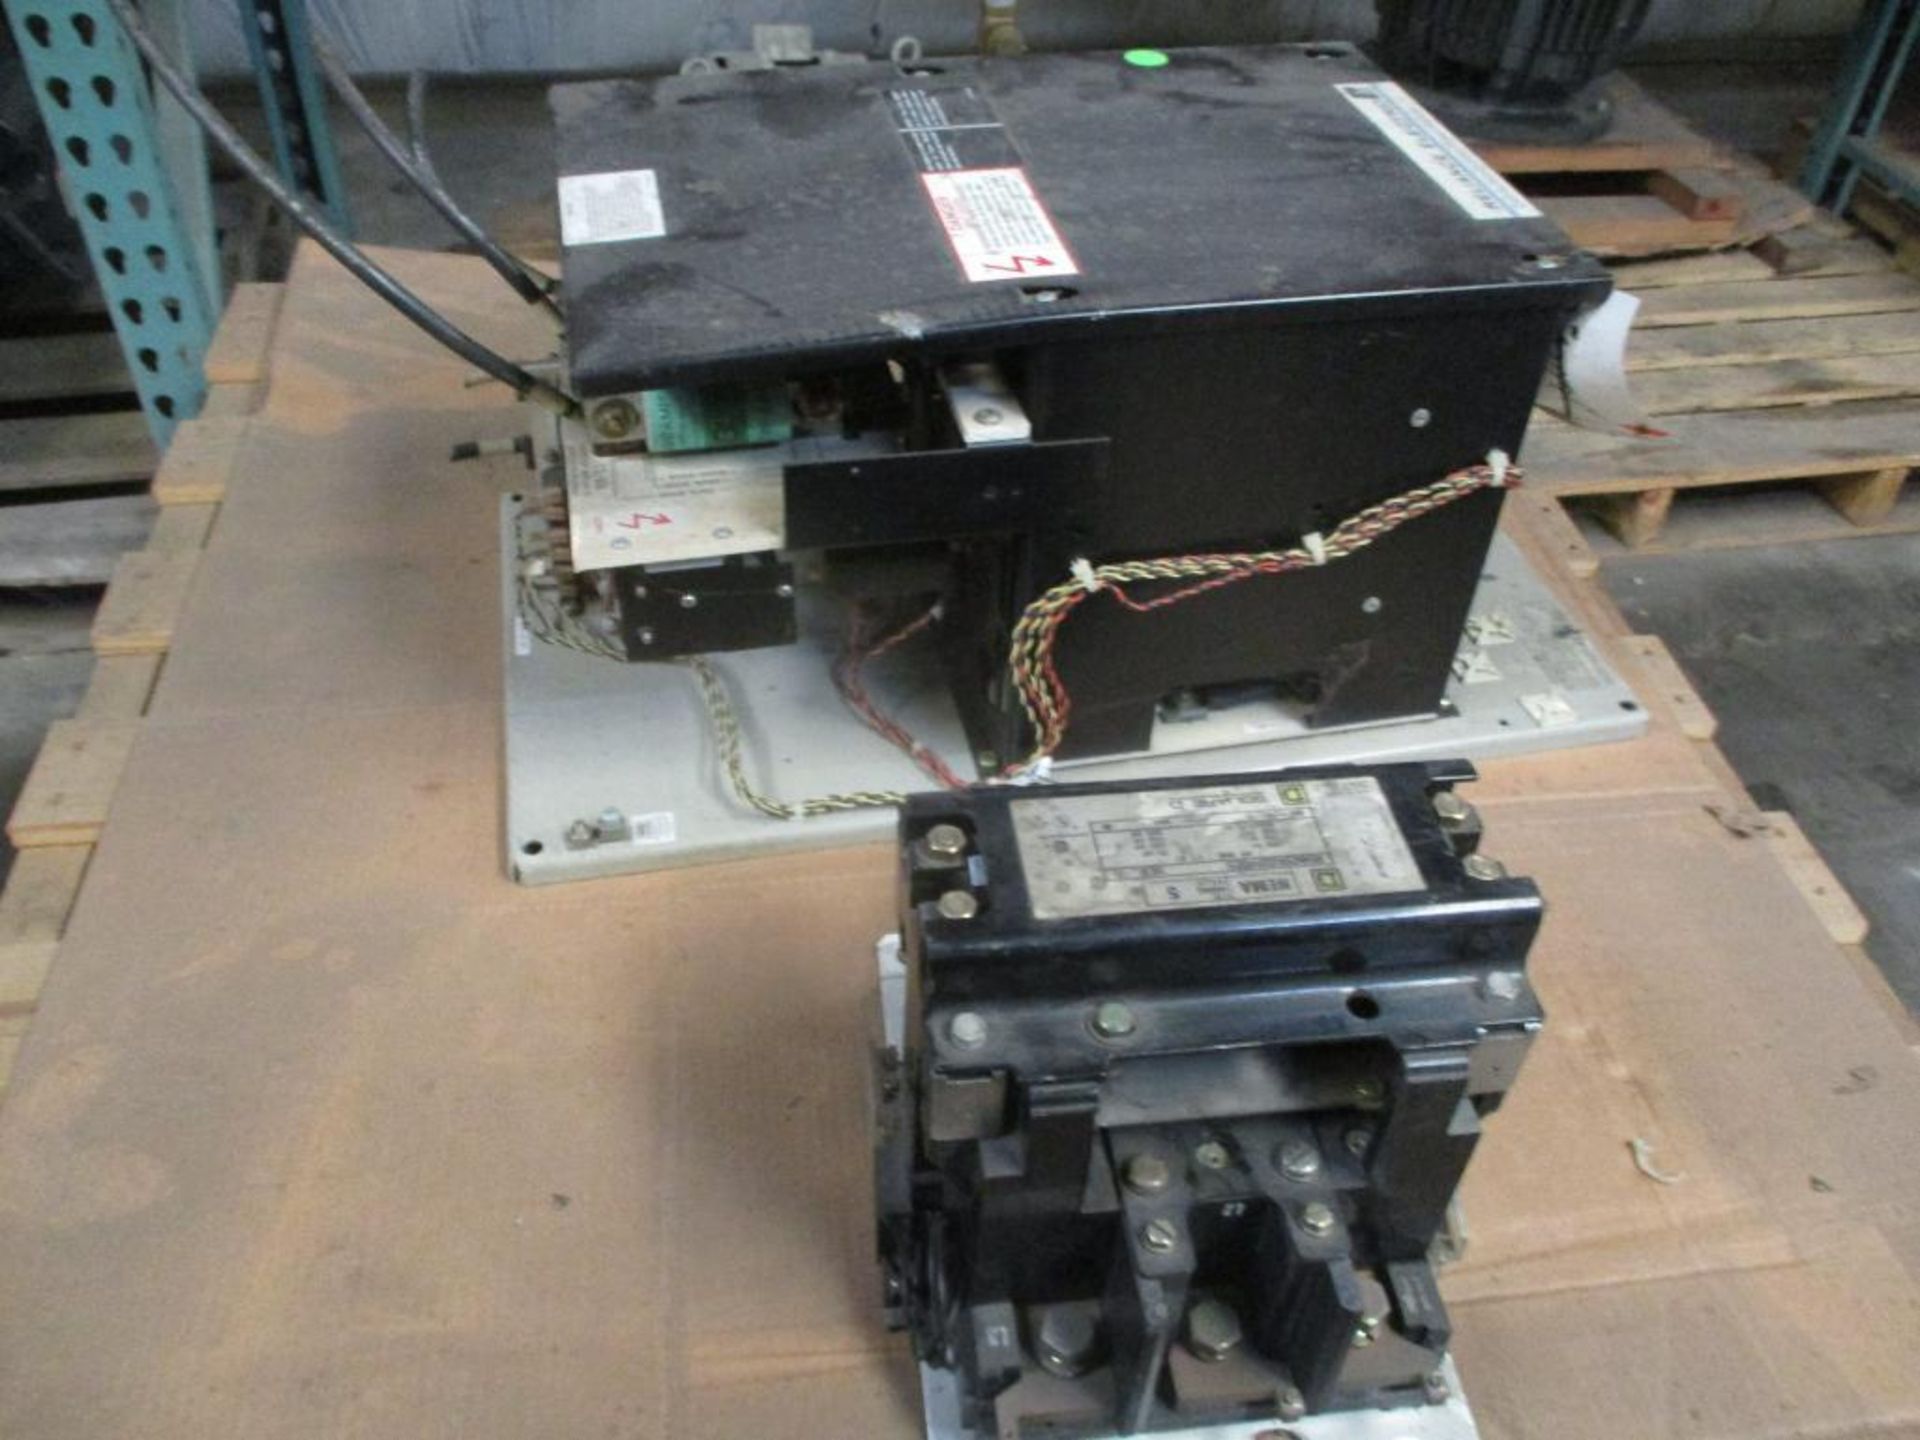 Square D Size 5 Contactor & Reliance DCS Power Module, 50-150 HP (Used) - Image 2 of 4